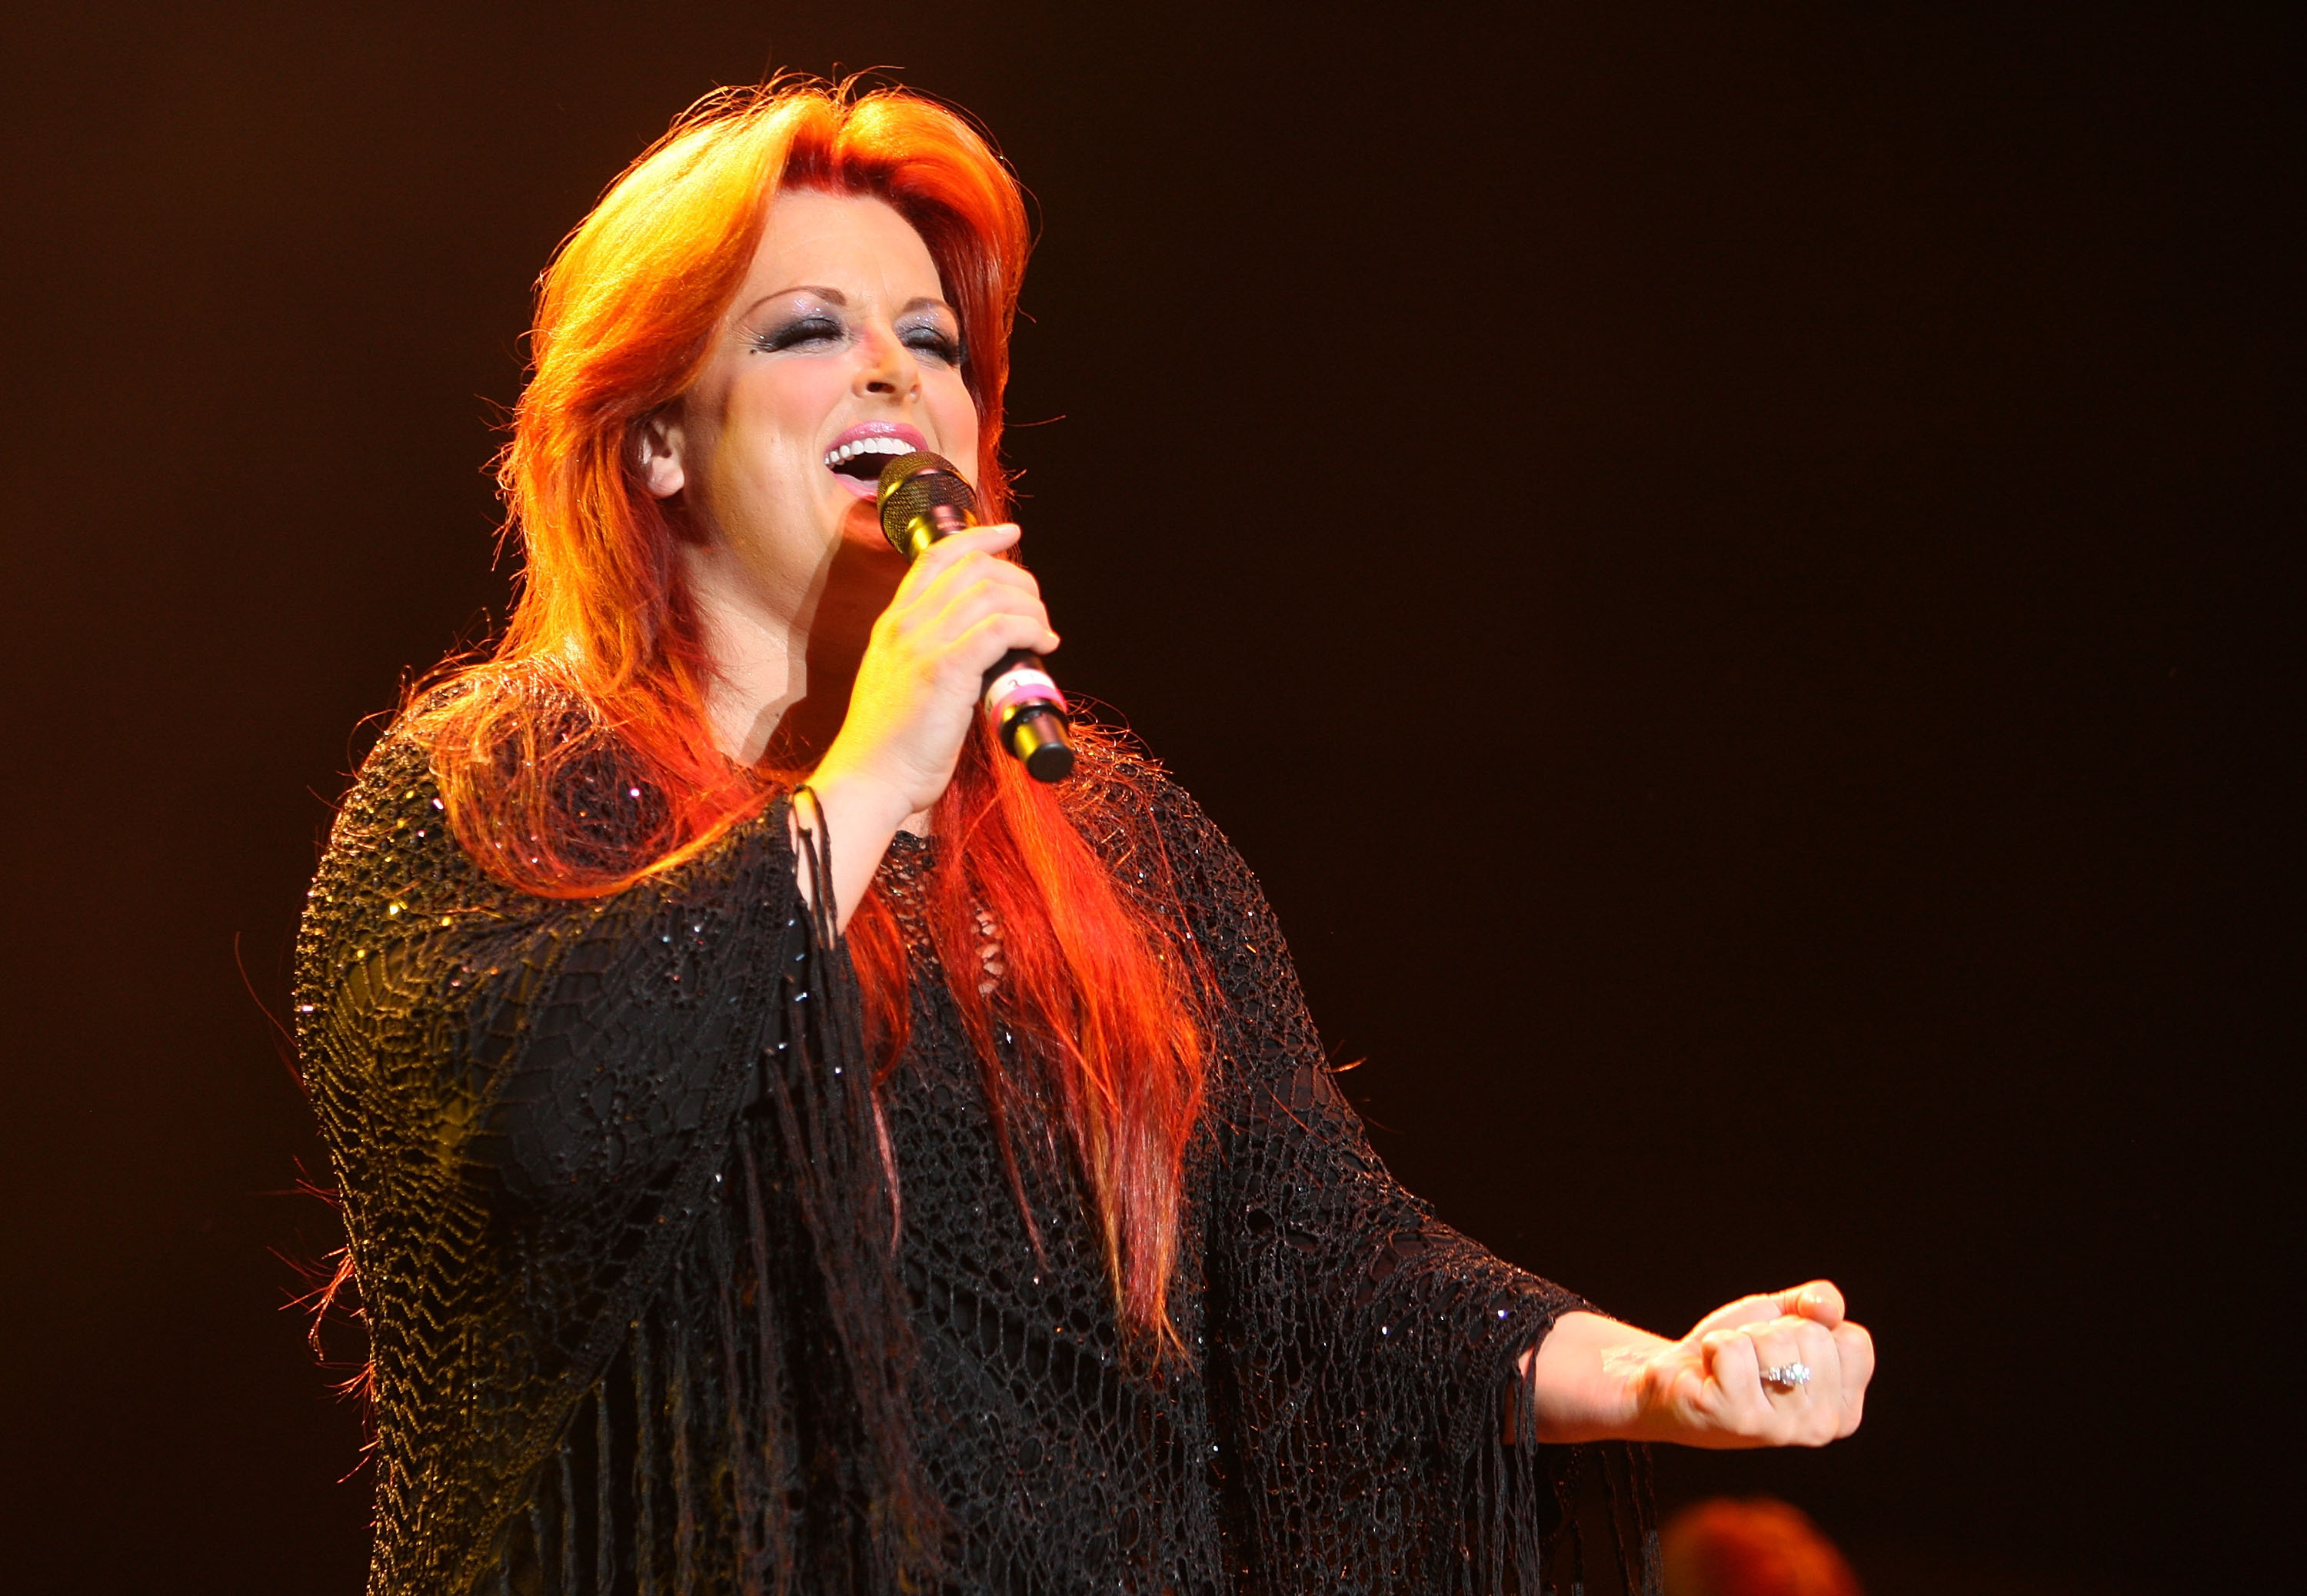 Wynonna Judd performs at the 2008 "Stagecoach: California's Country Music Festival" - Day 2 on May 3, 2008 in Indio, California | Source: Getty Images